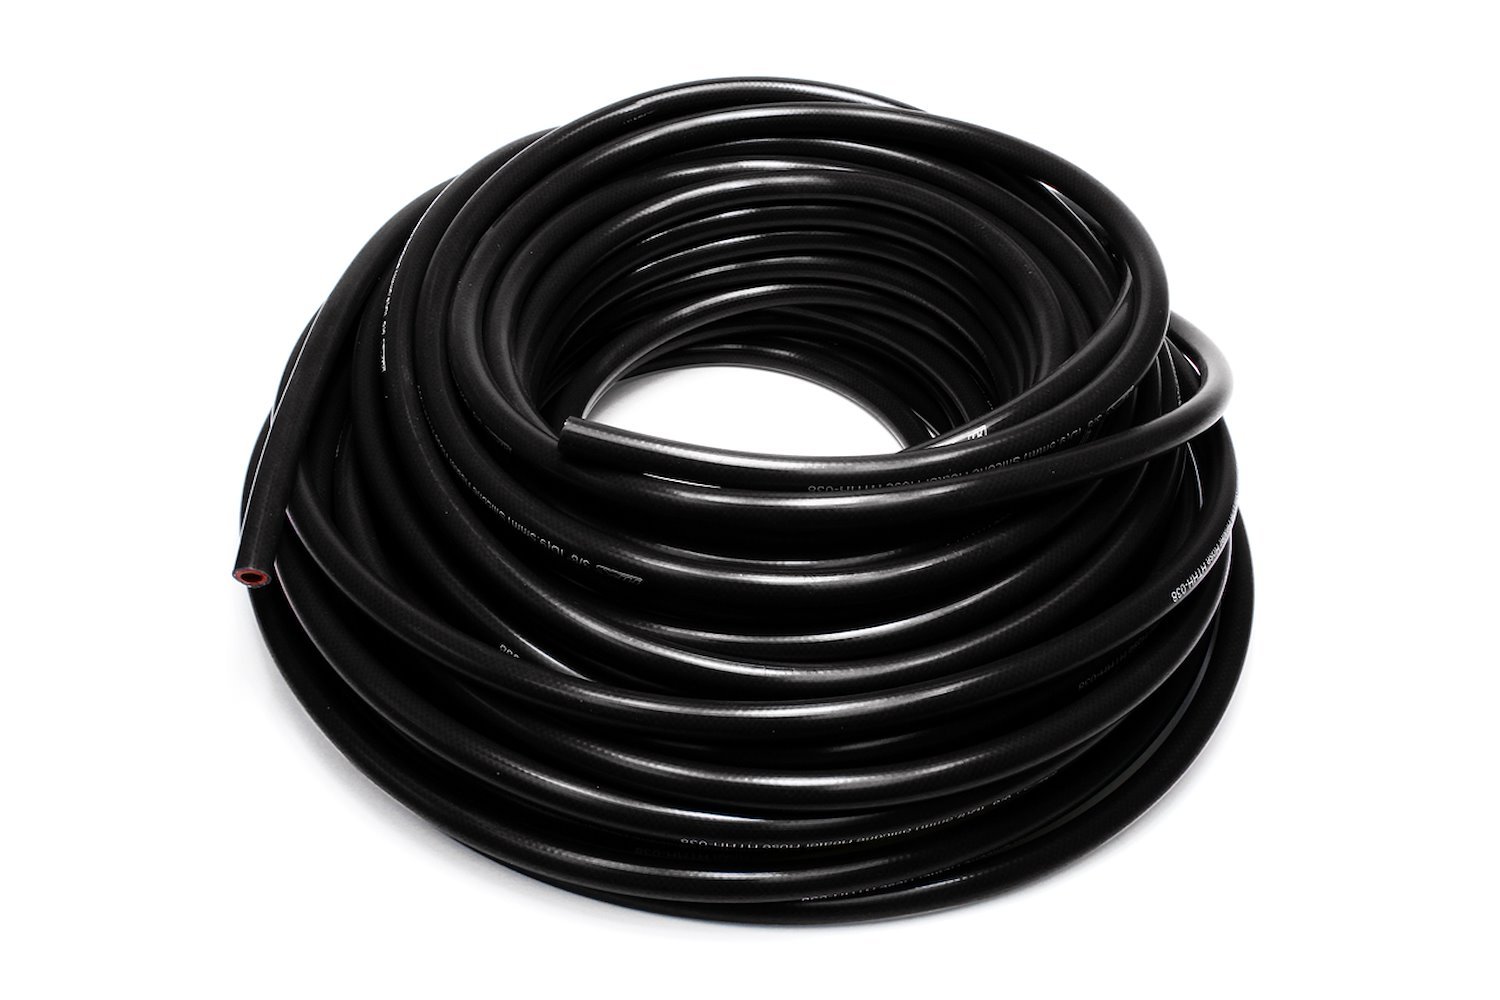 HTHH-087-BLKx100 Silicone Heater Hose Tubing, High-Temp Reinforced, 7/8 in. ID, 100 ft. Roll, Black